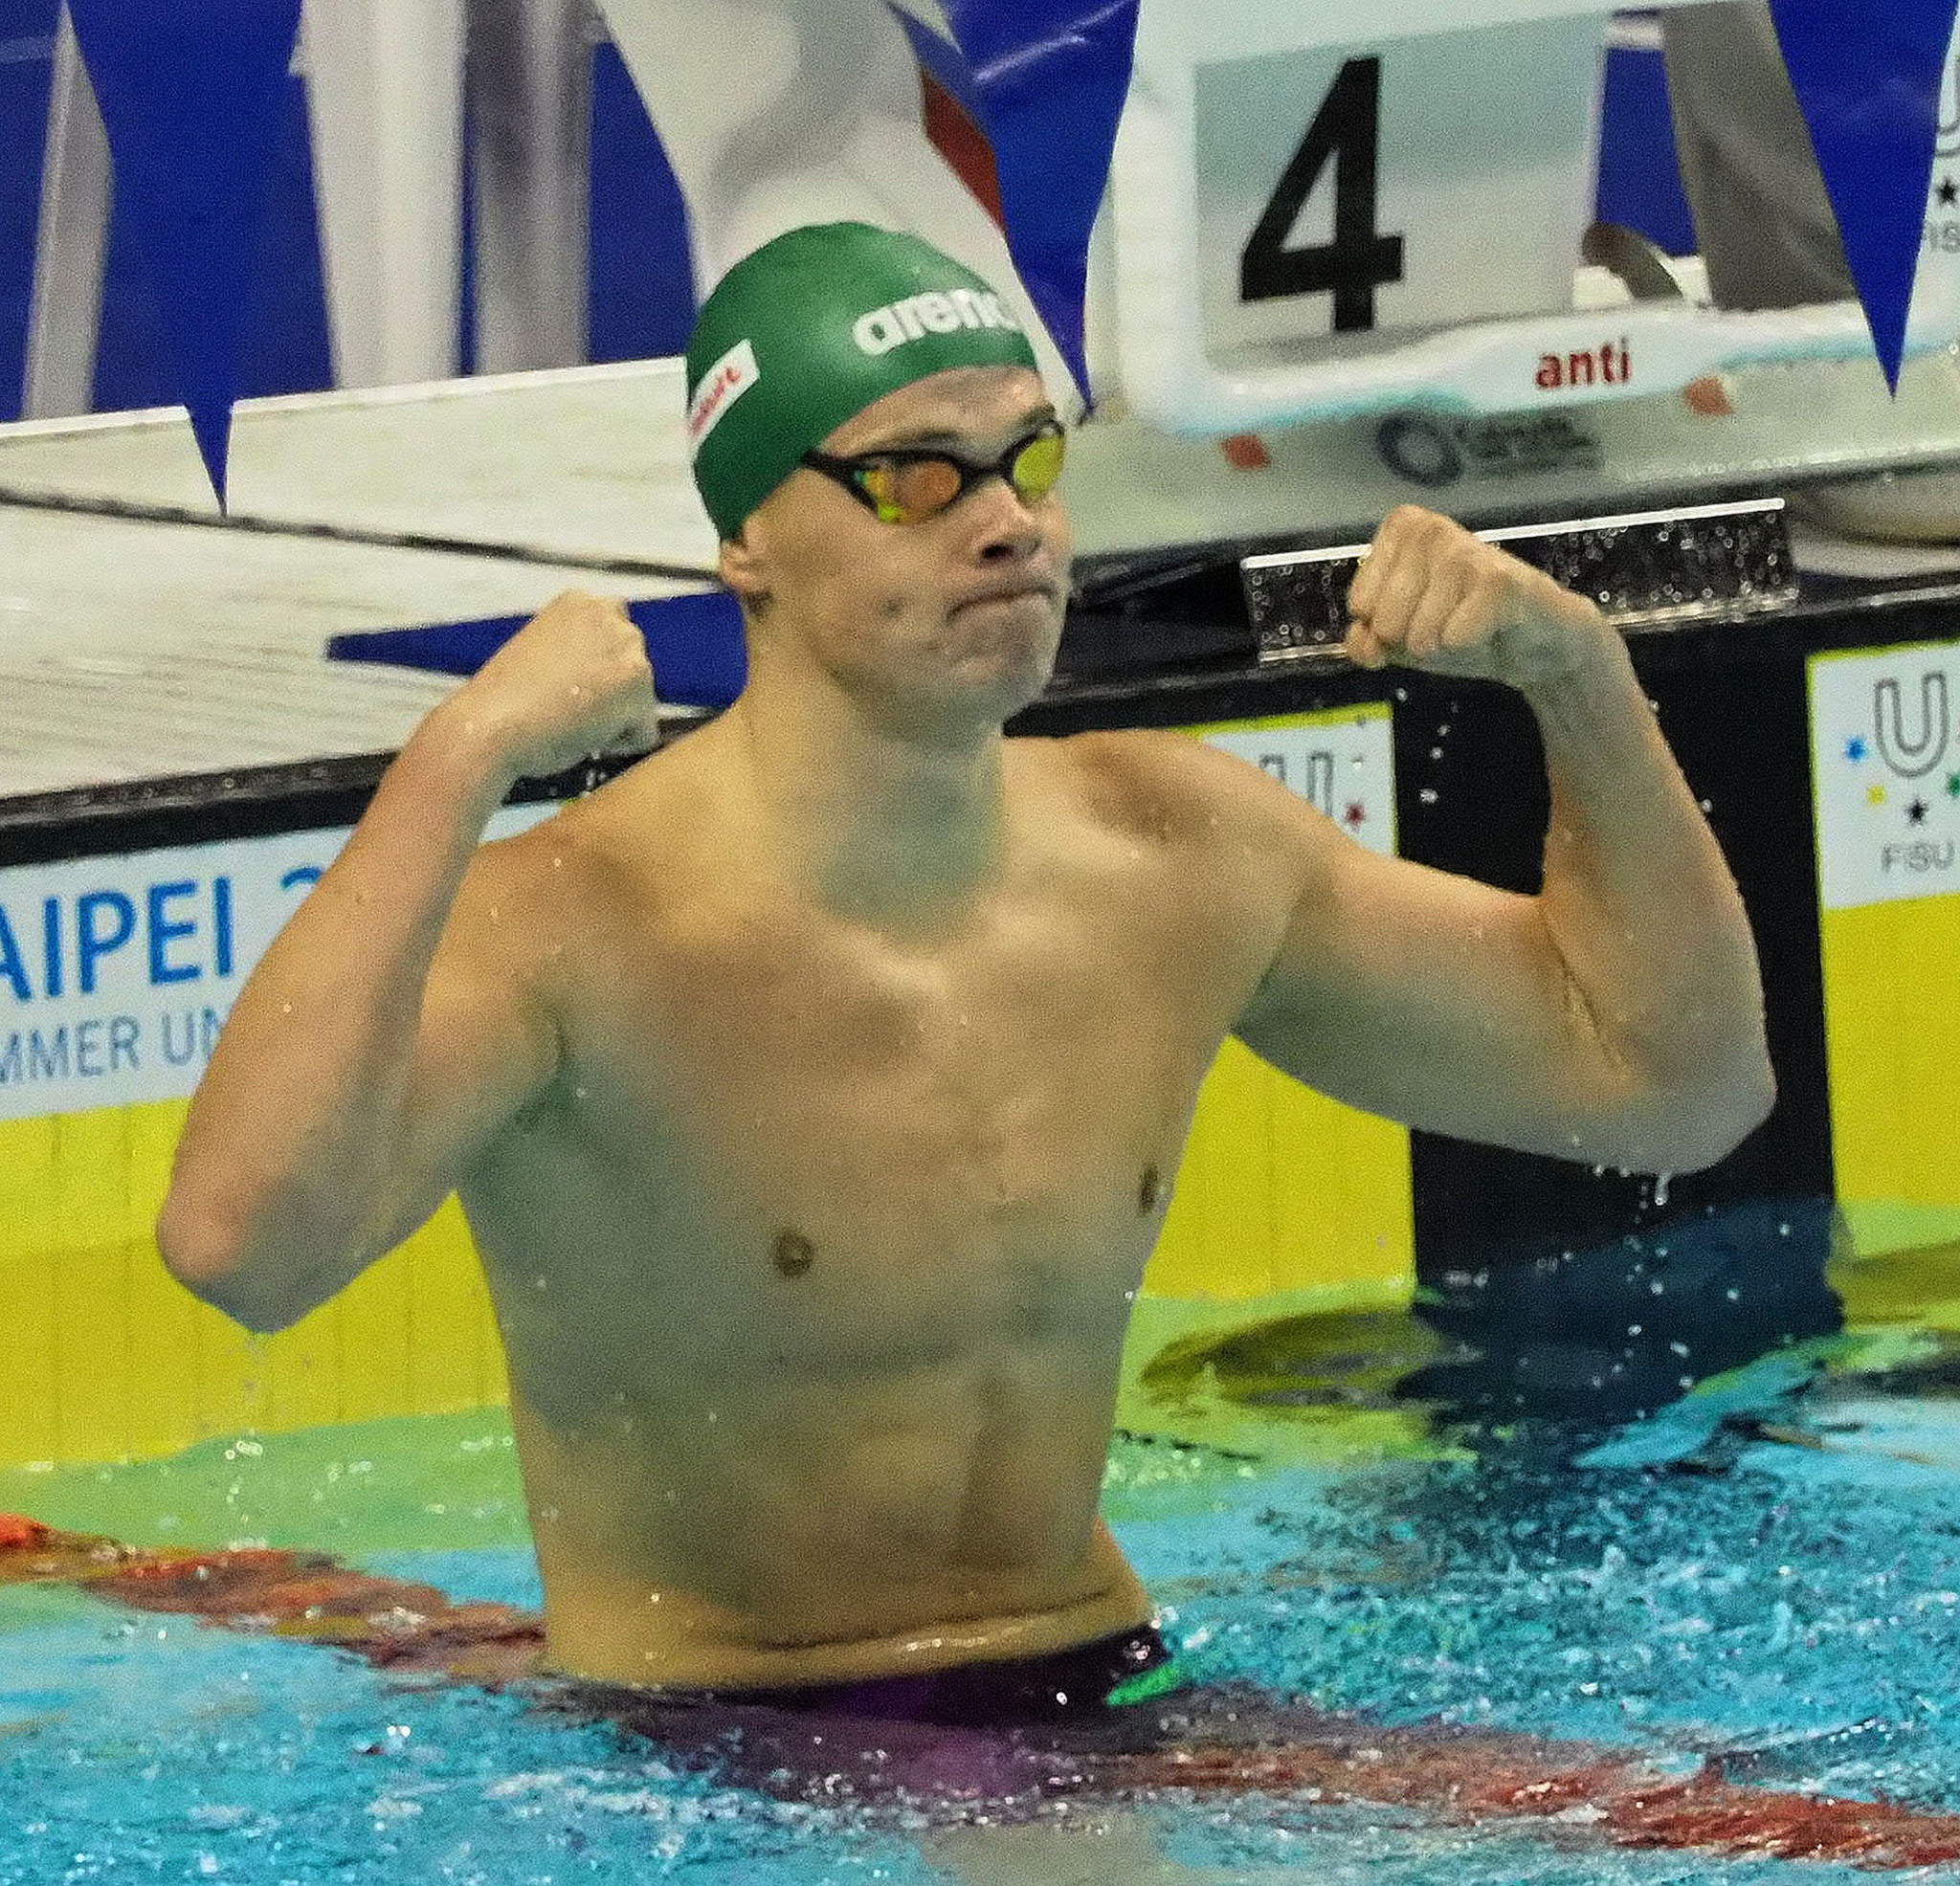 Lithuania's Danas Rapsys also claimed his second gold and third medal of Taipei 2017 ©Taipei 2017